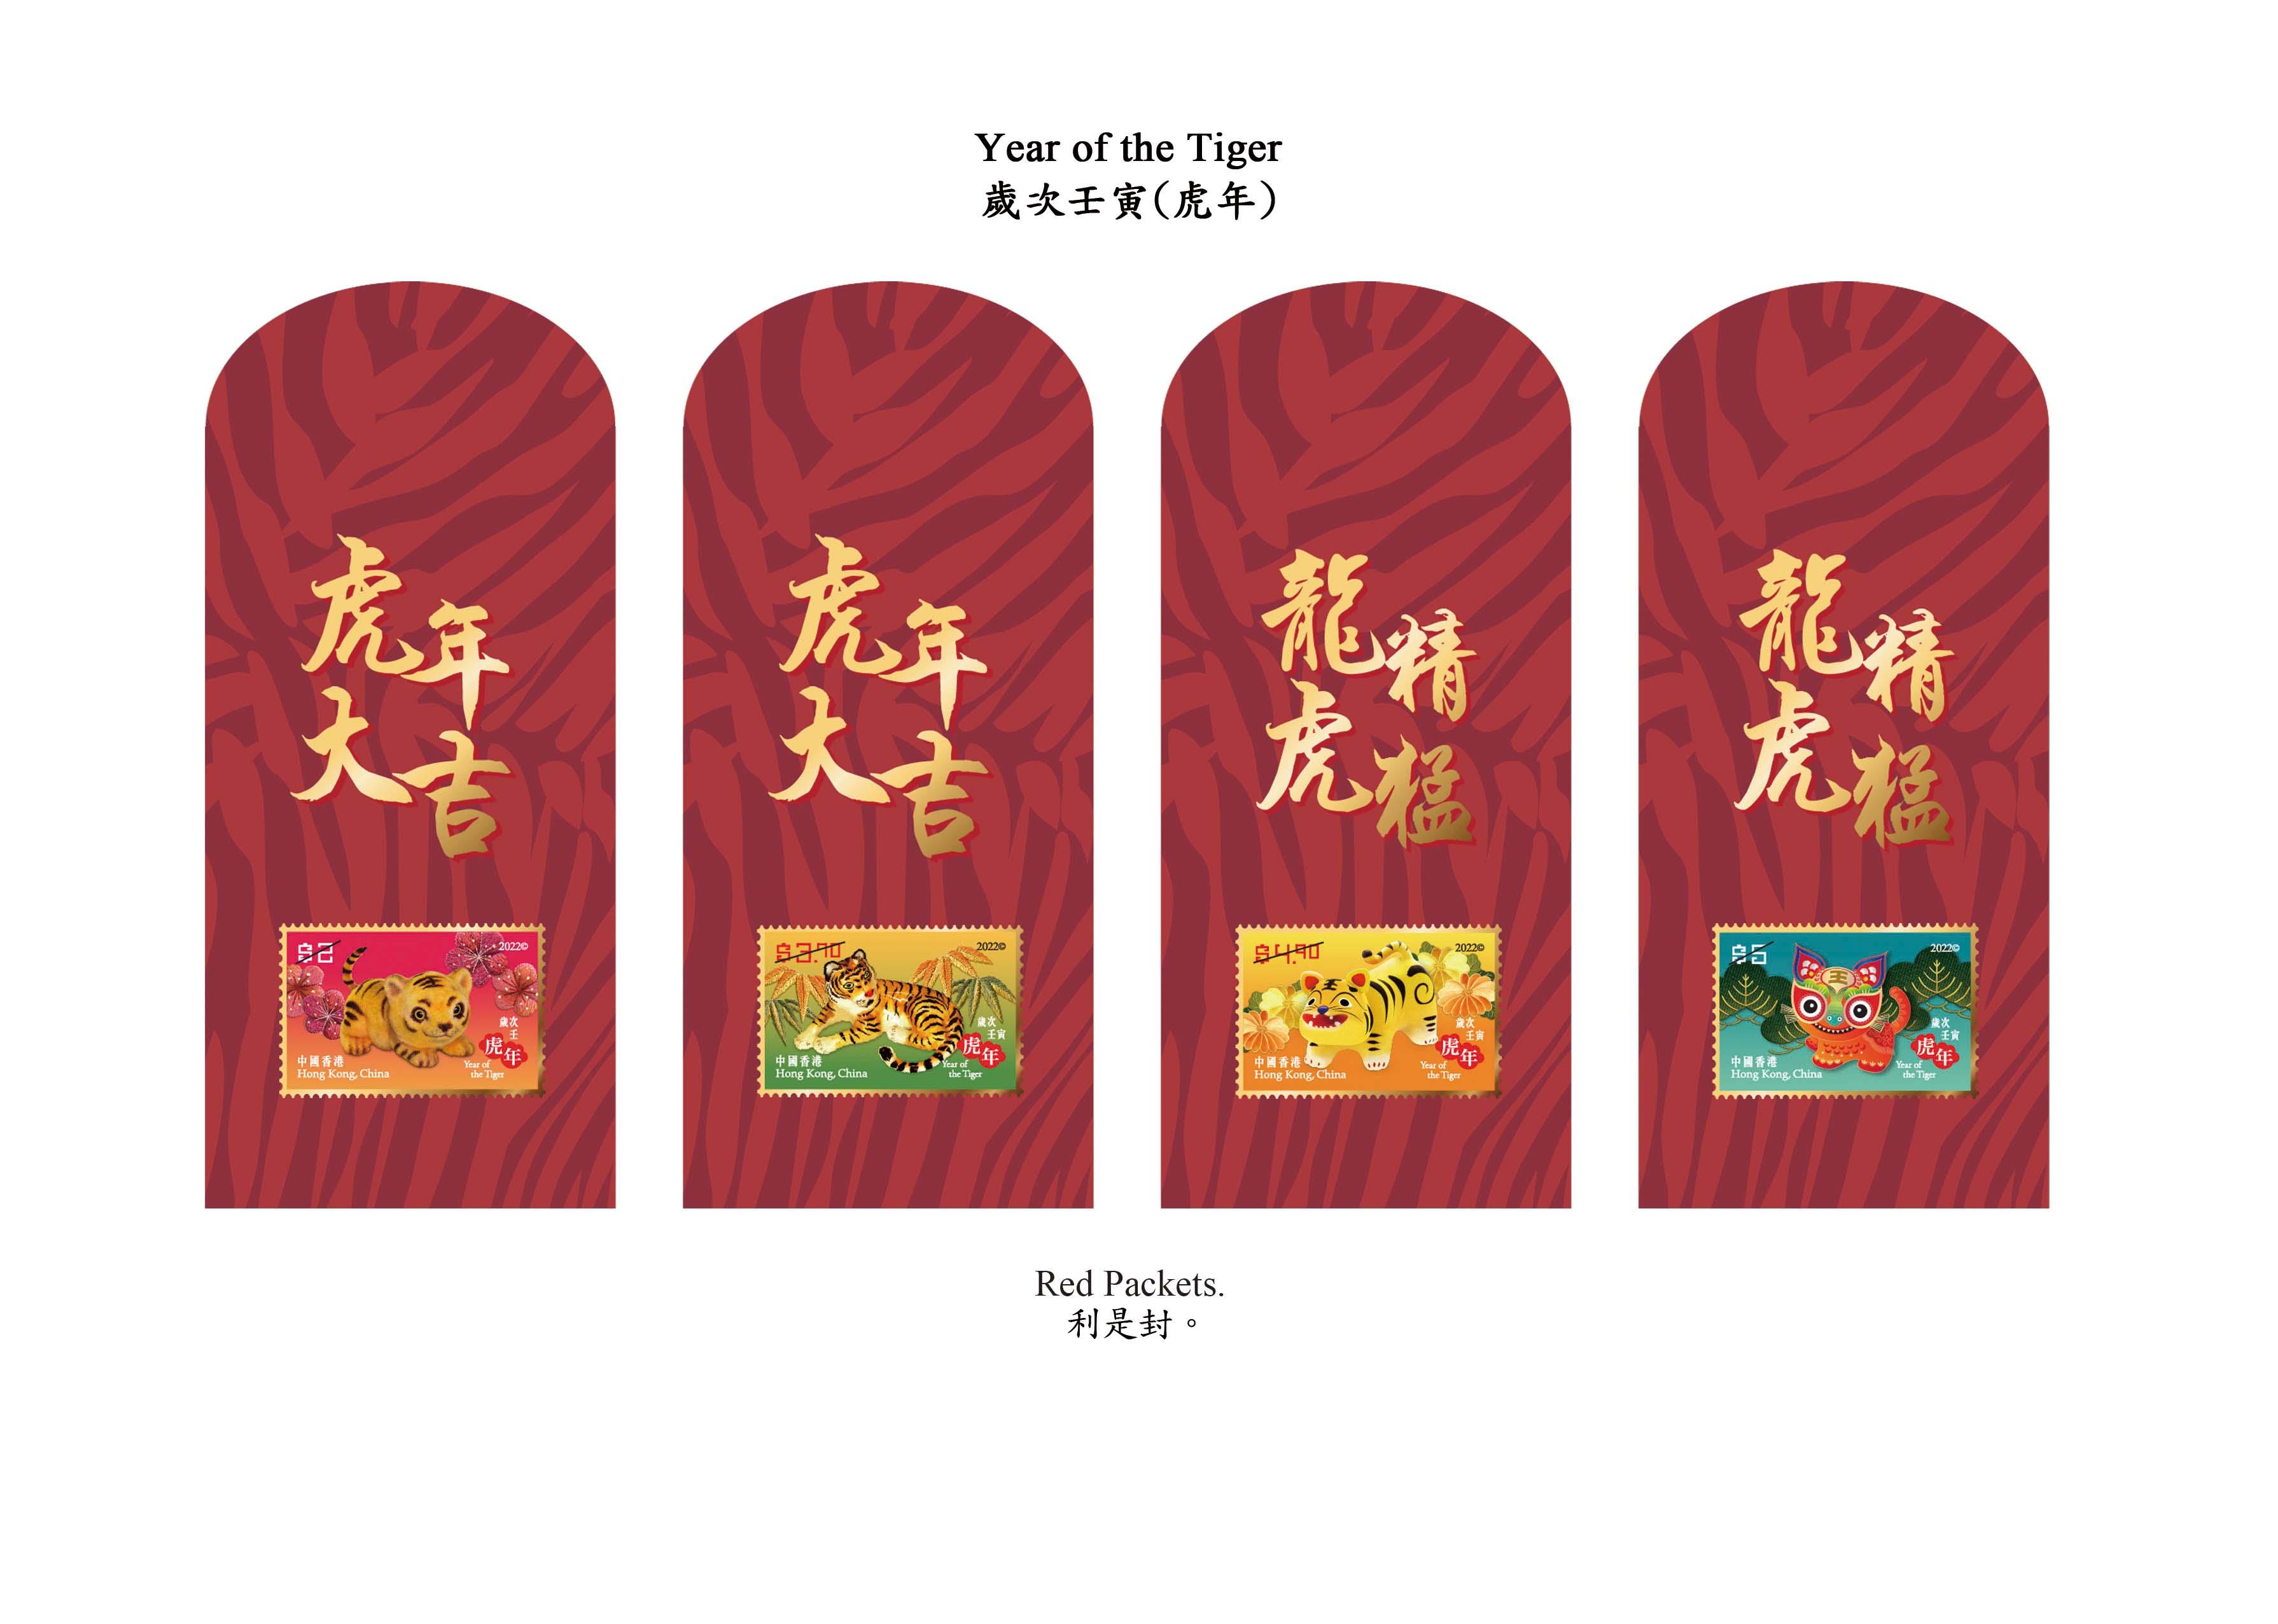 Hongkong Post will launch a special stamp issue and associated philatelic products with the theme "Year of the Tiger" on January 18 (Tuesday). Photo shows the red packets.

